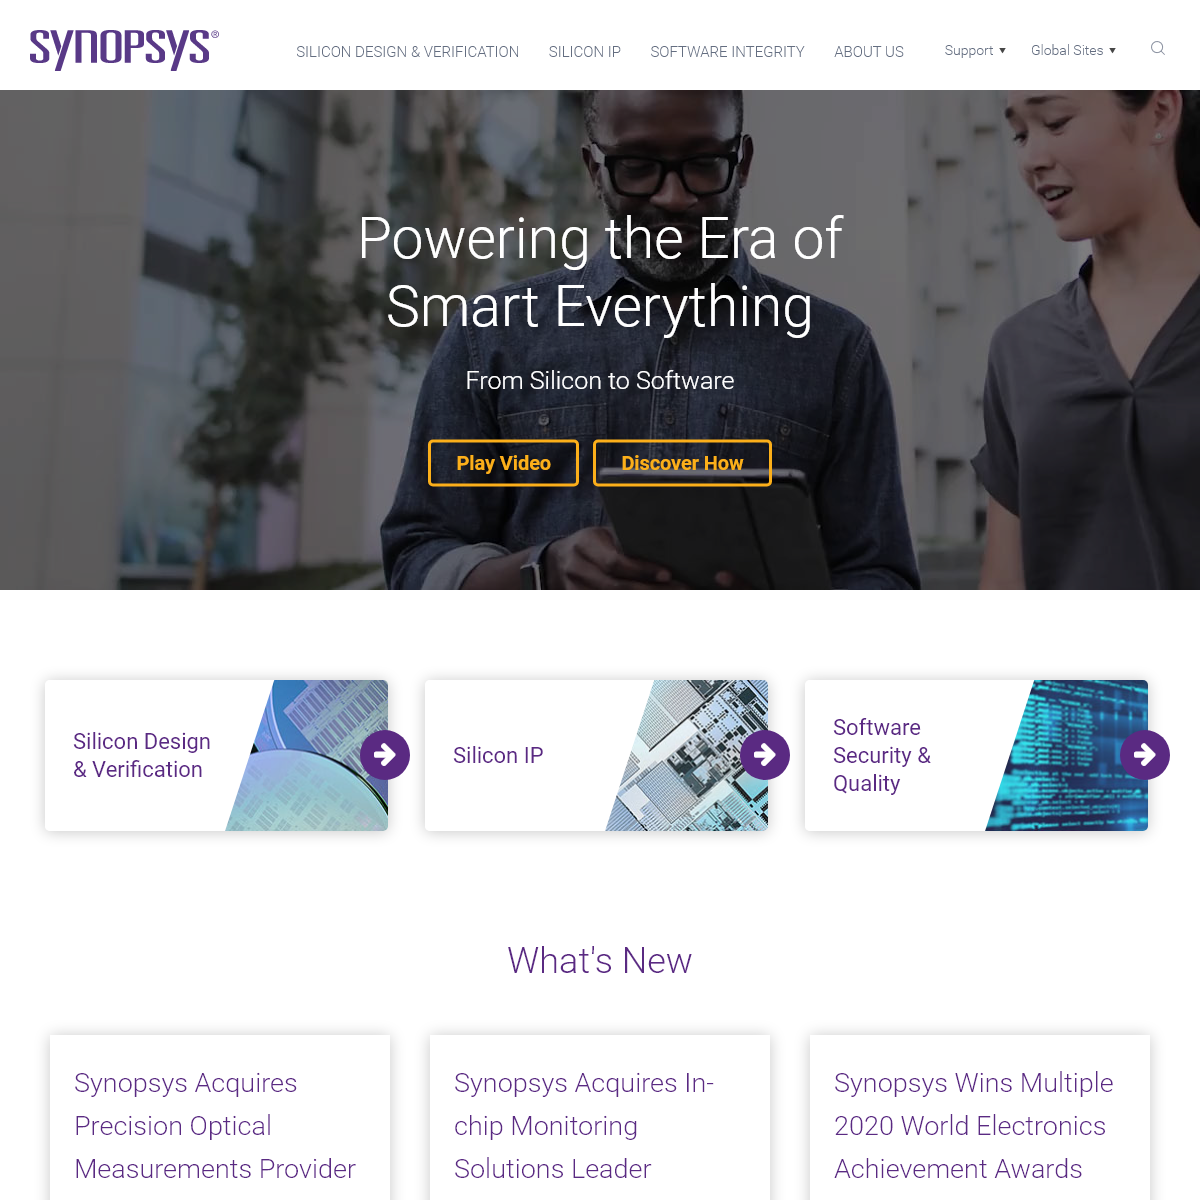 A complete backup of synopsys.com